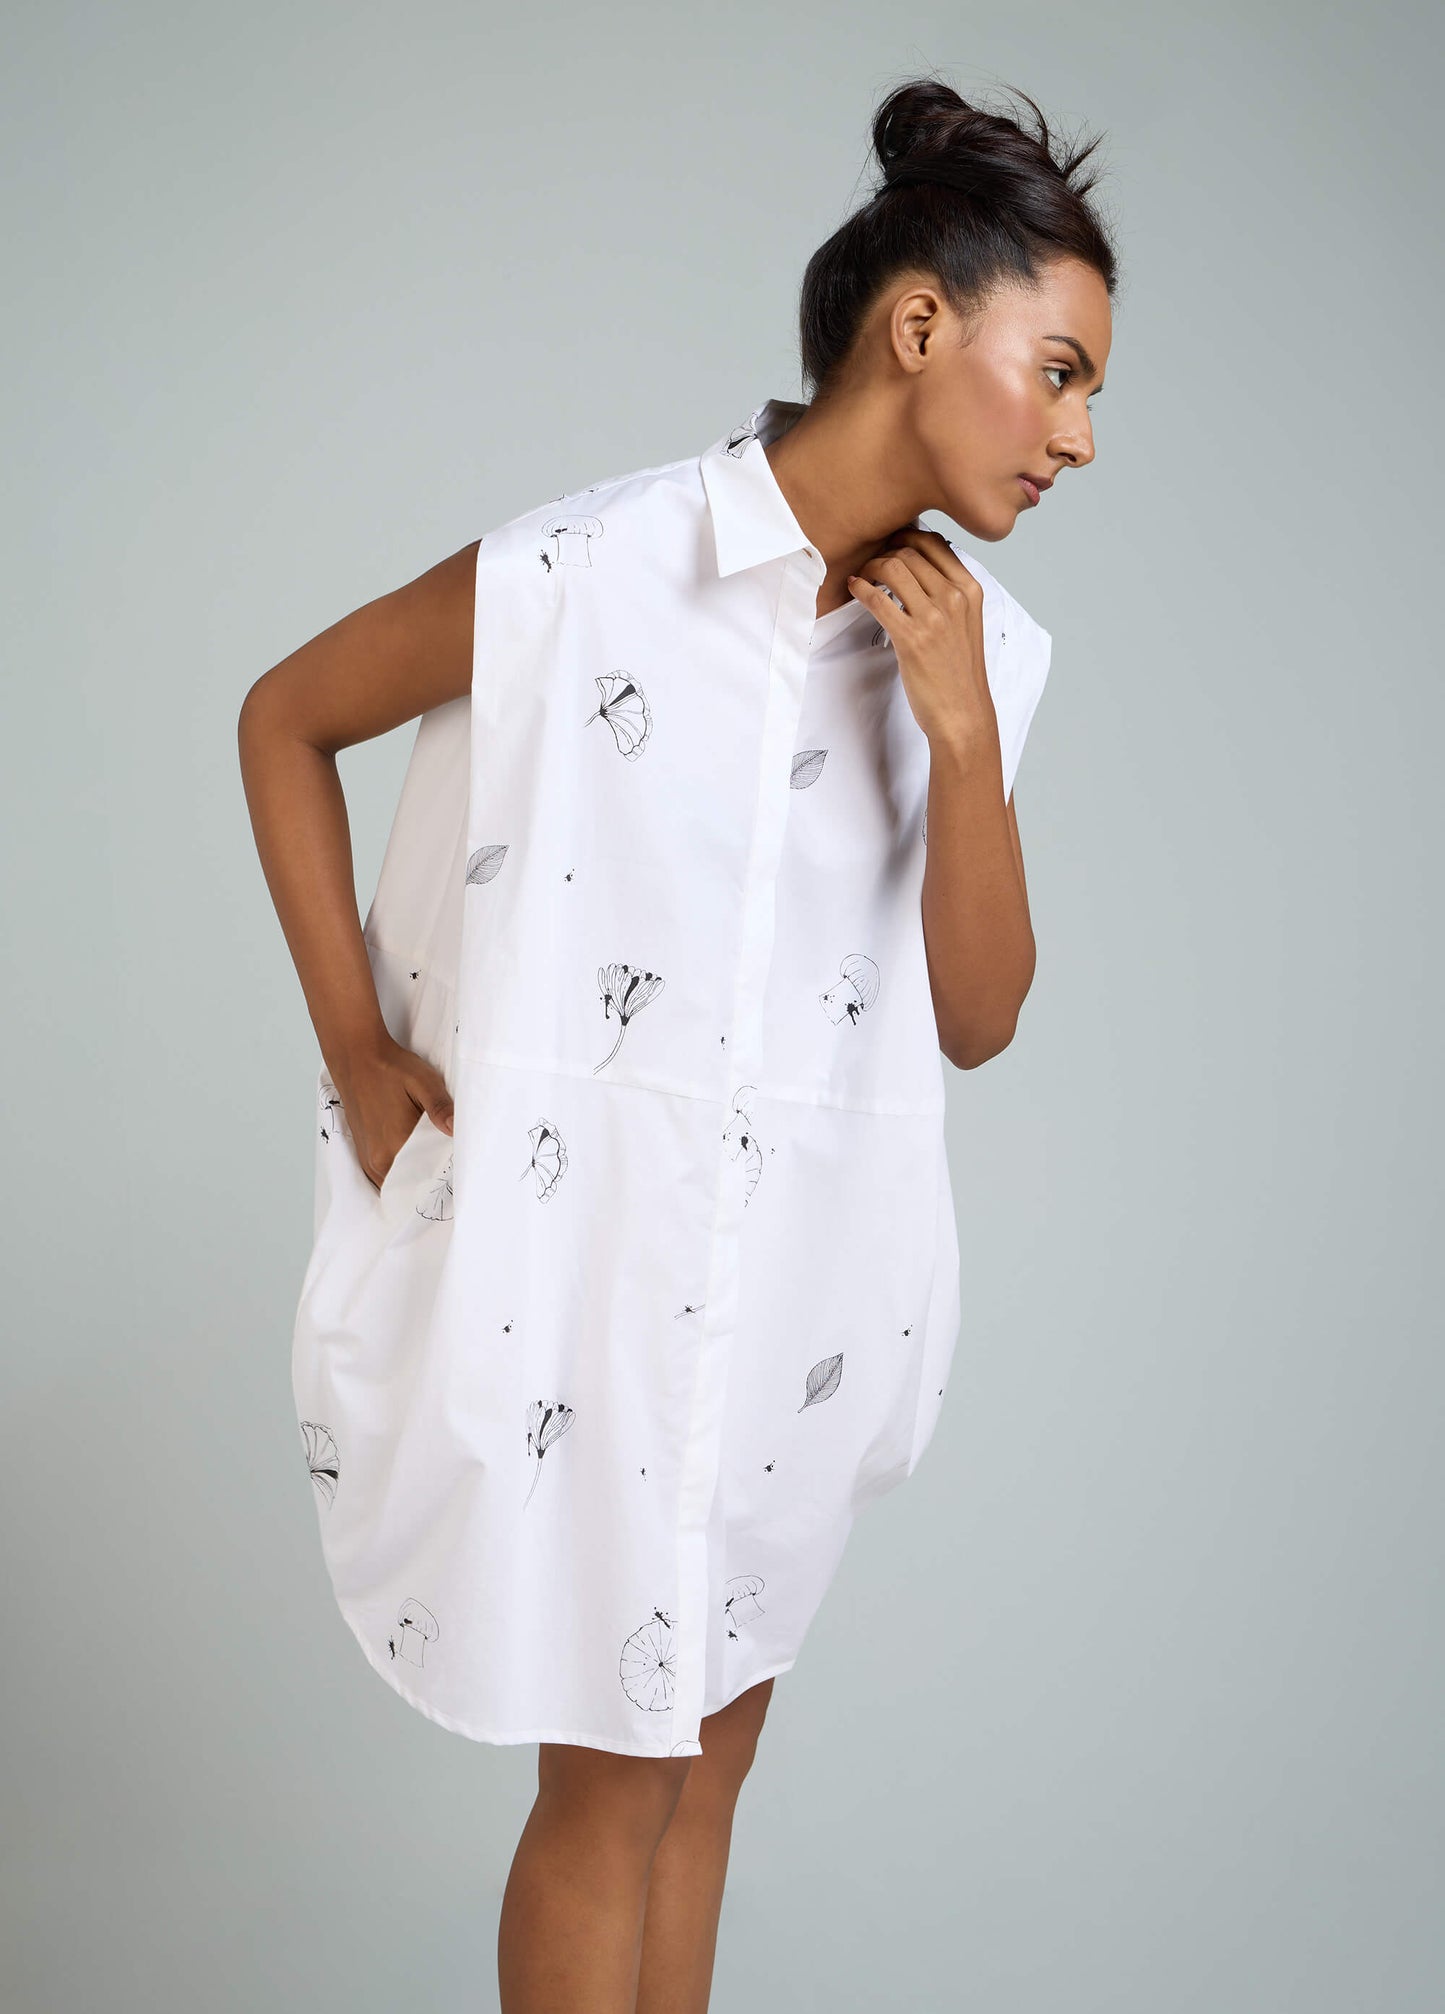 SLEVELESS DRESS WITH ROUNDED HEM AND SHOULDER PANEL